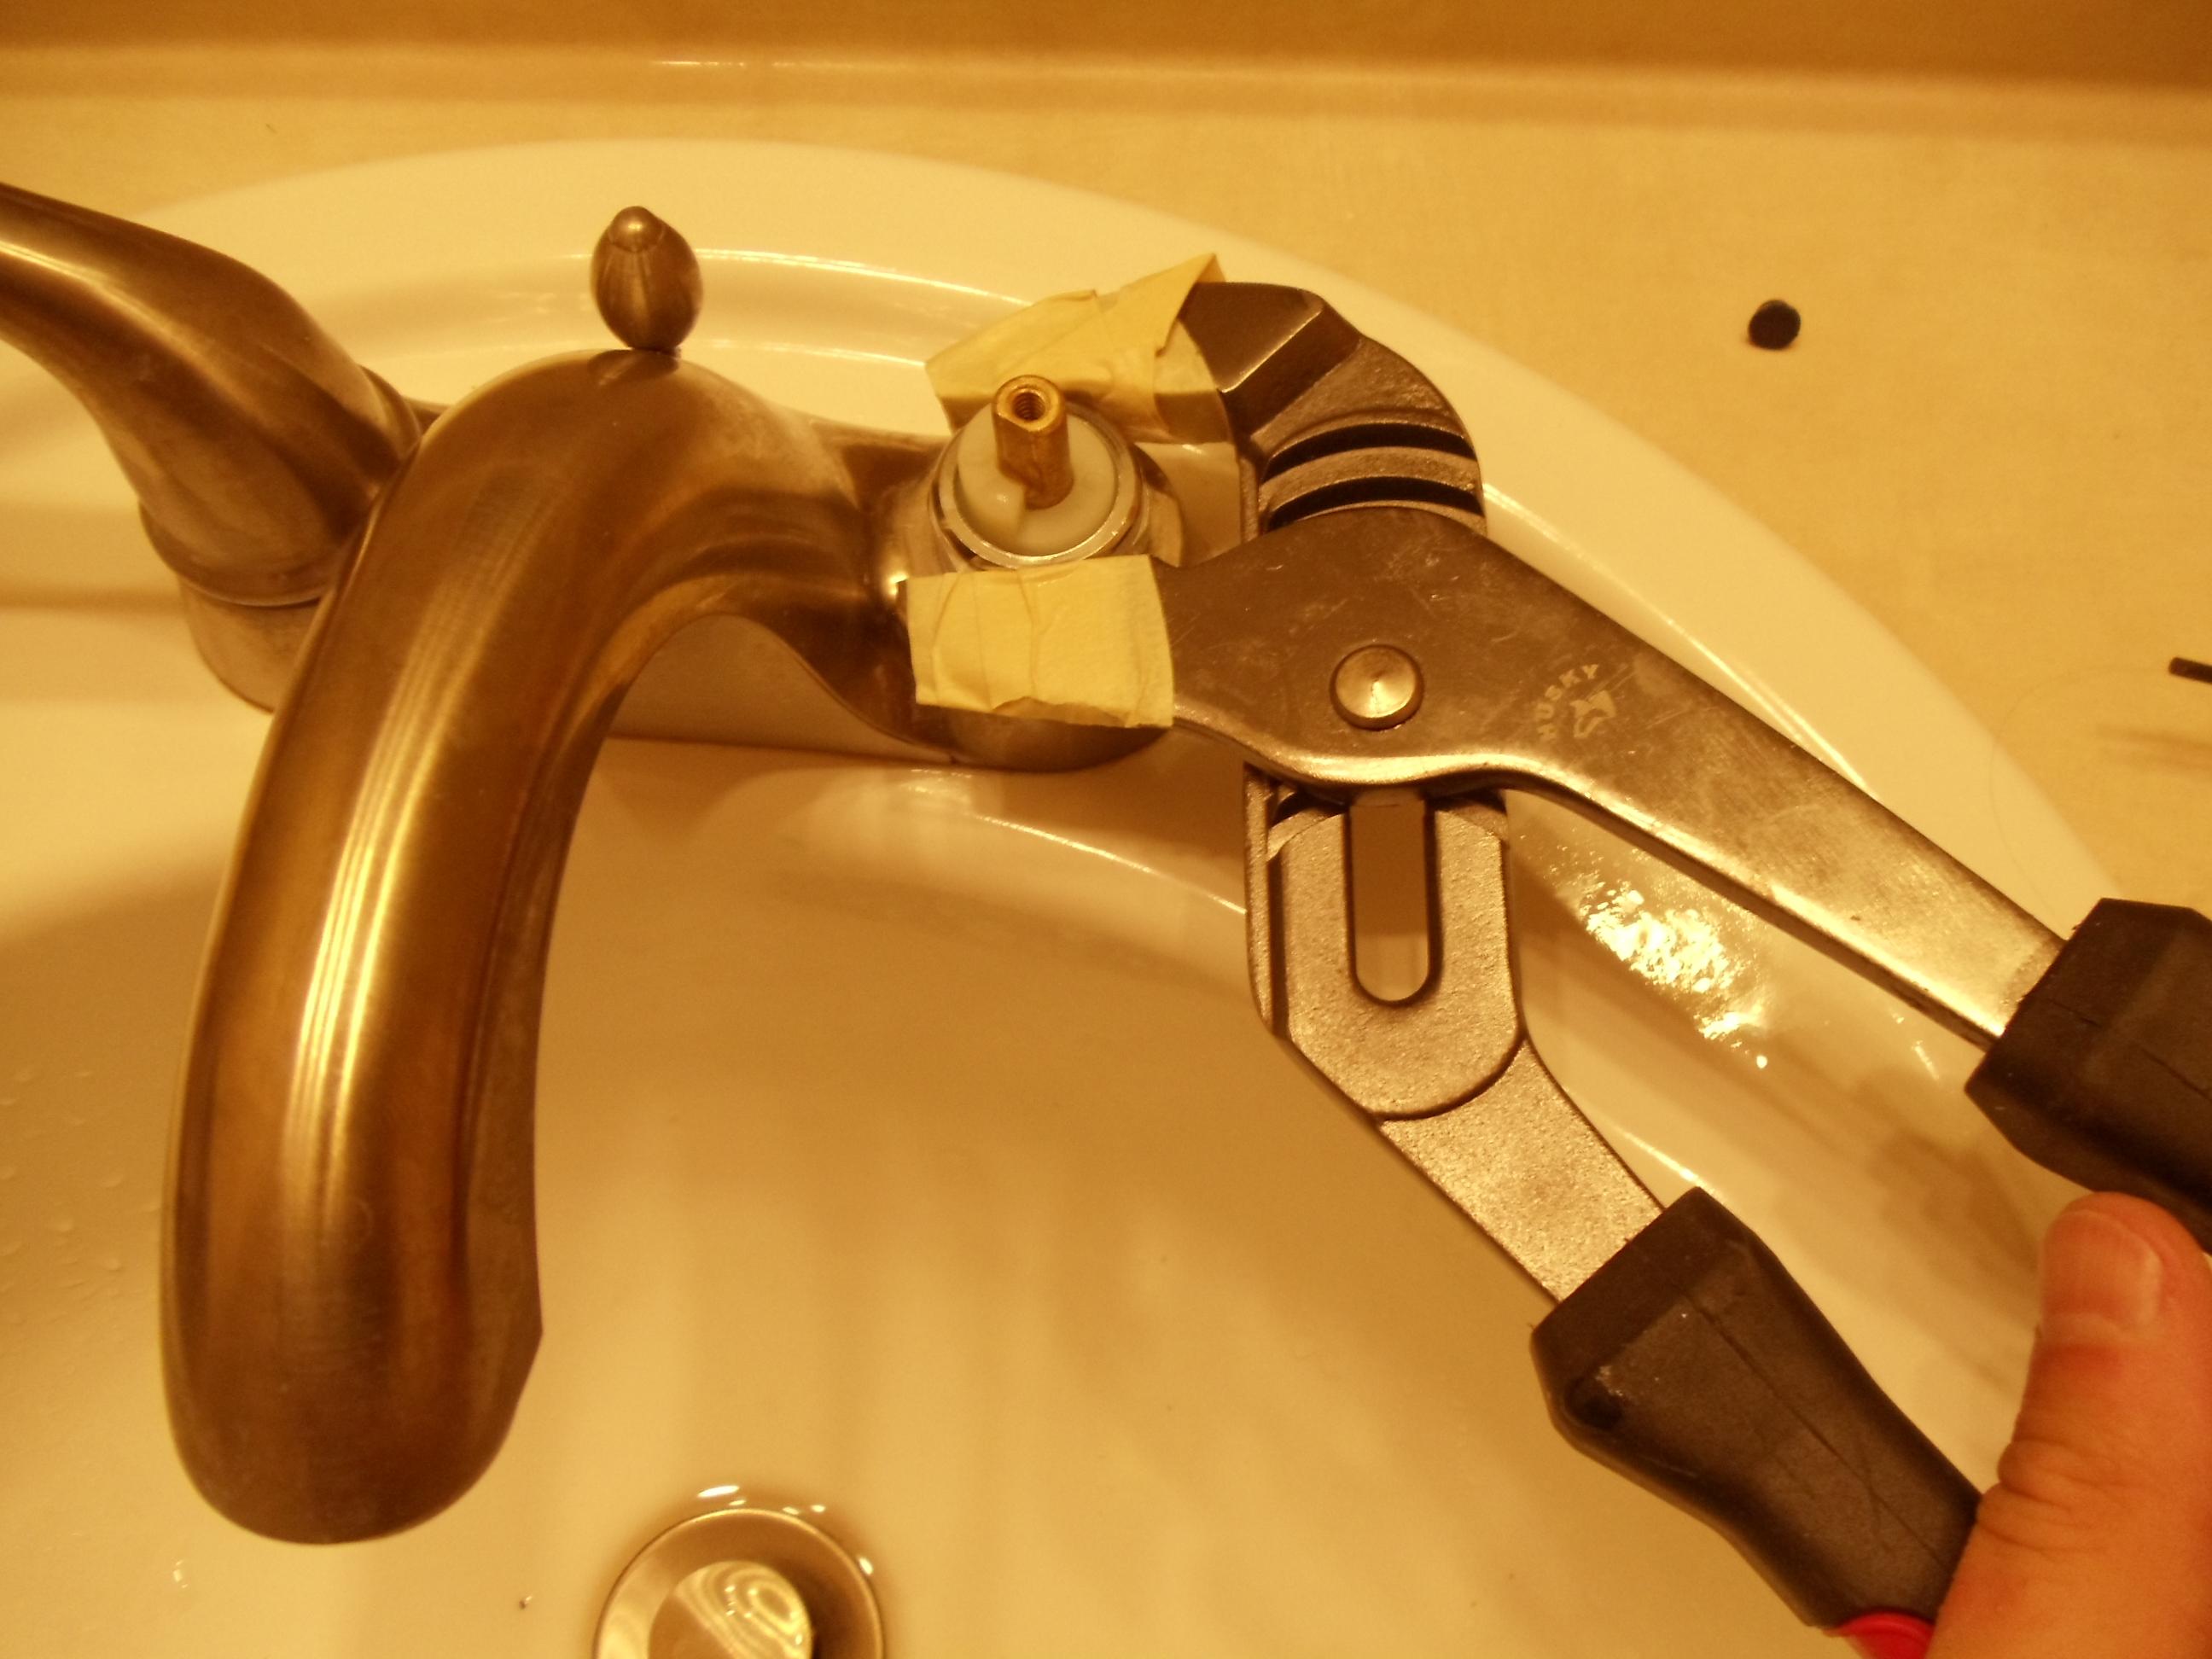 How To Fix A Leaking Glacier Bay Bathroom Sink Faucet DIY Home